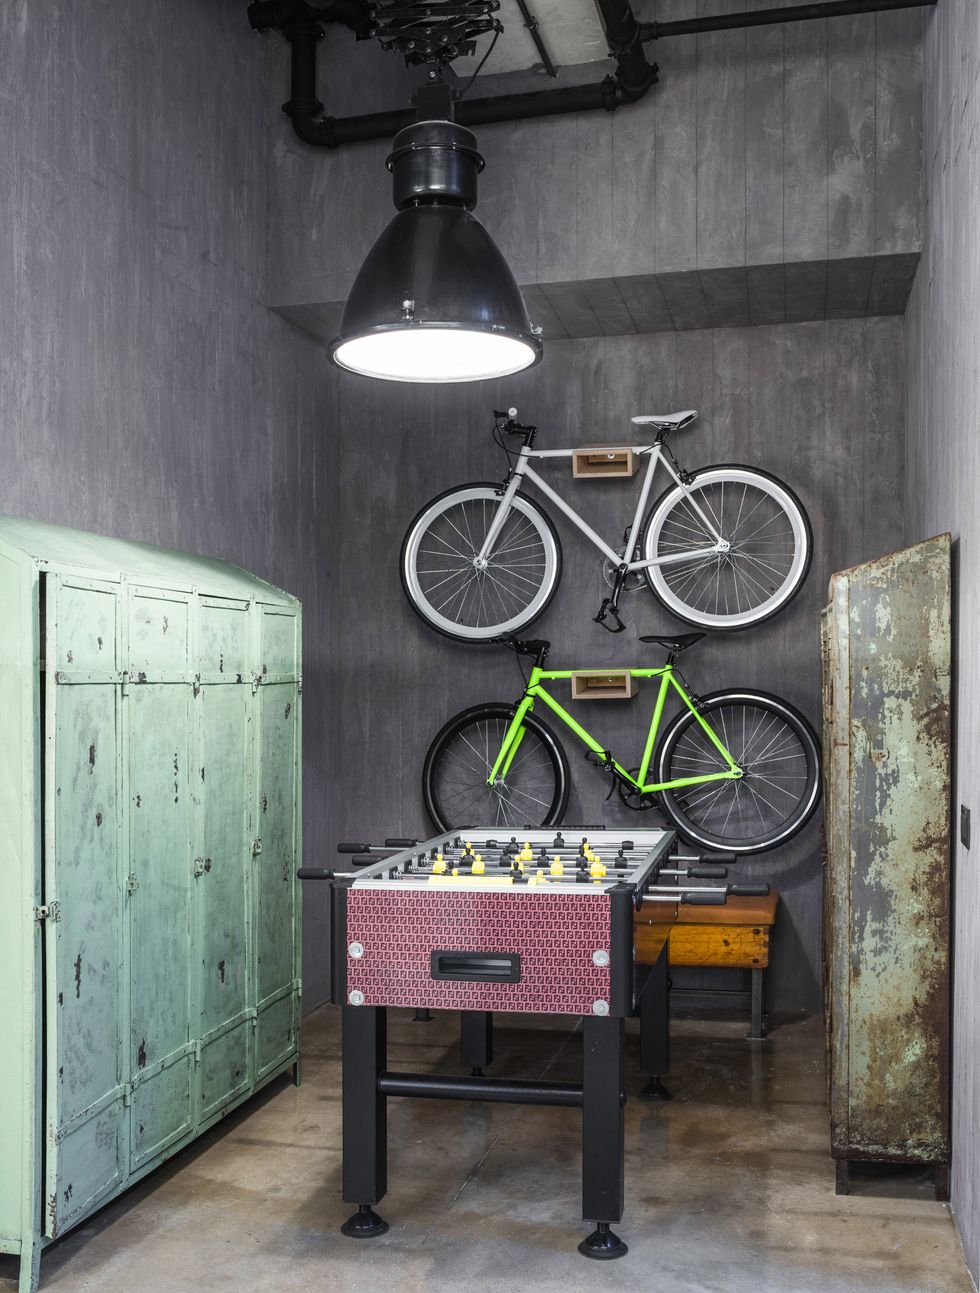 Room, Bicycle wheel, Wall, Bicycle, Furniture, Table, Interior design, House, Vehicle, Light fixture, 